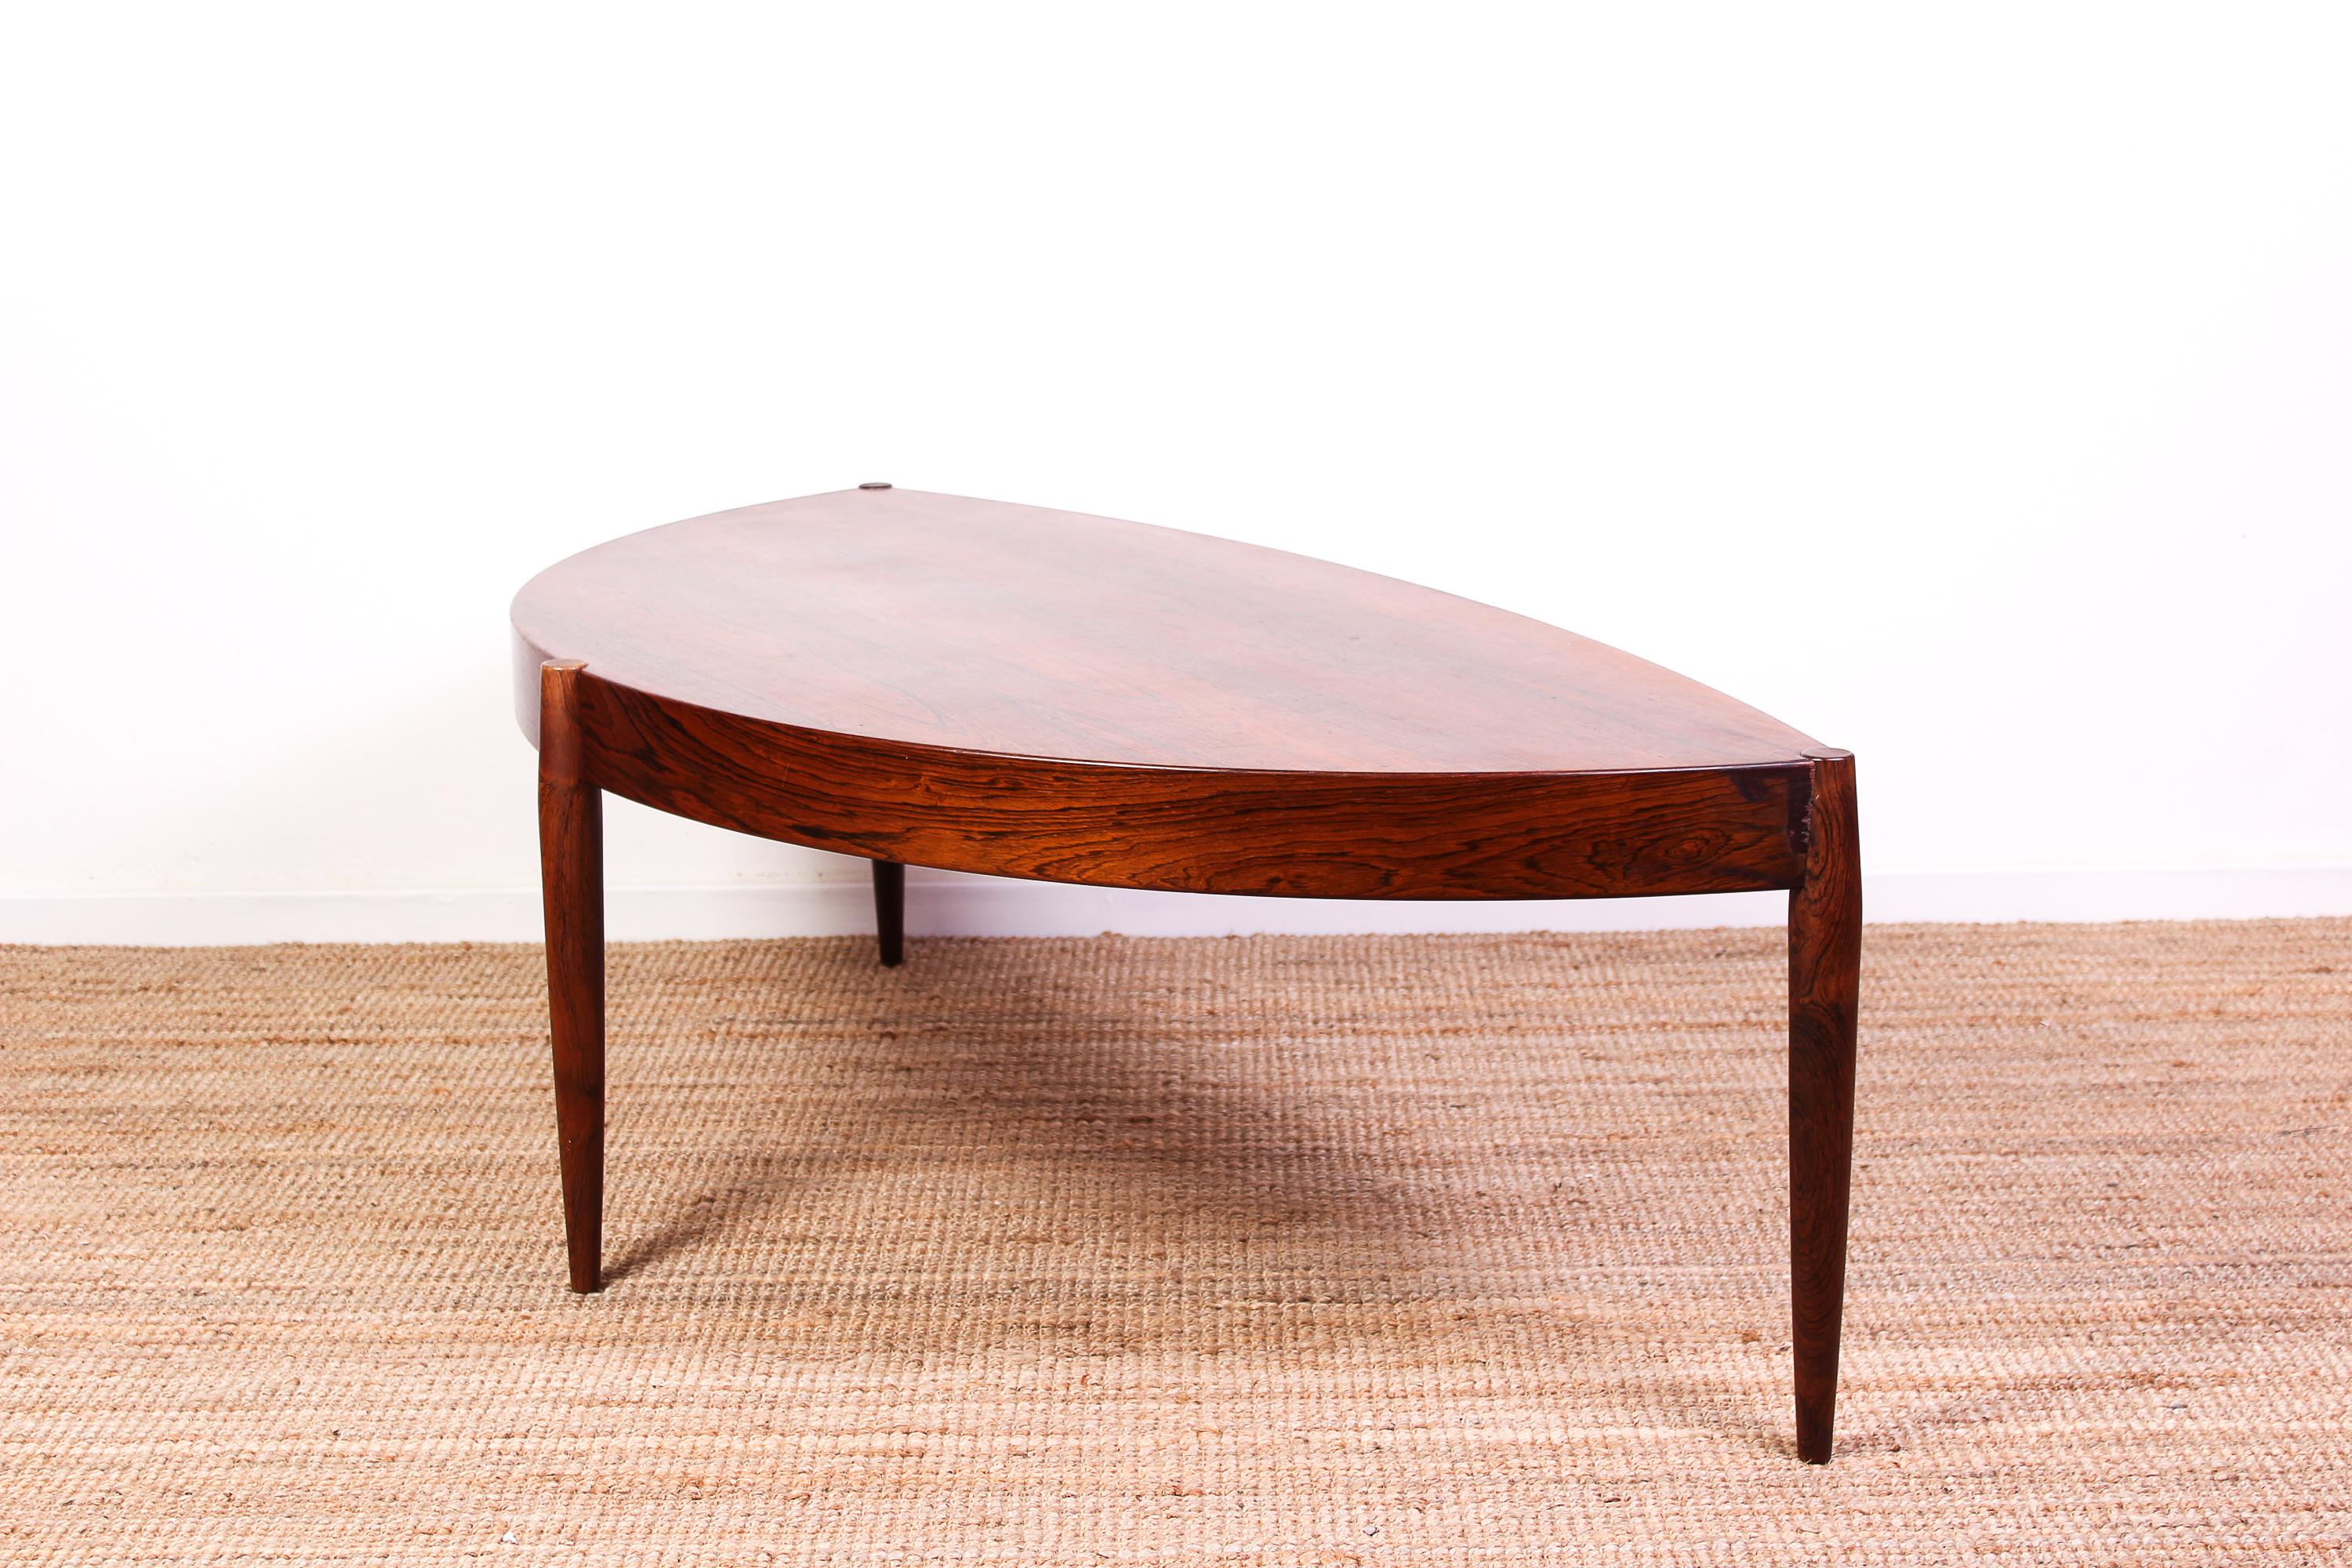 Mid-20th Century Johannes Andersen Rosewood Coffee Table for Tresnum, 1950s For Sale